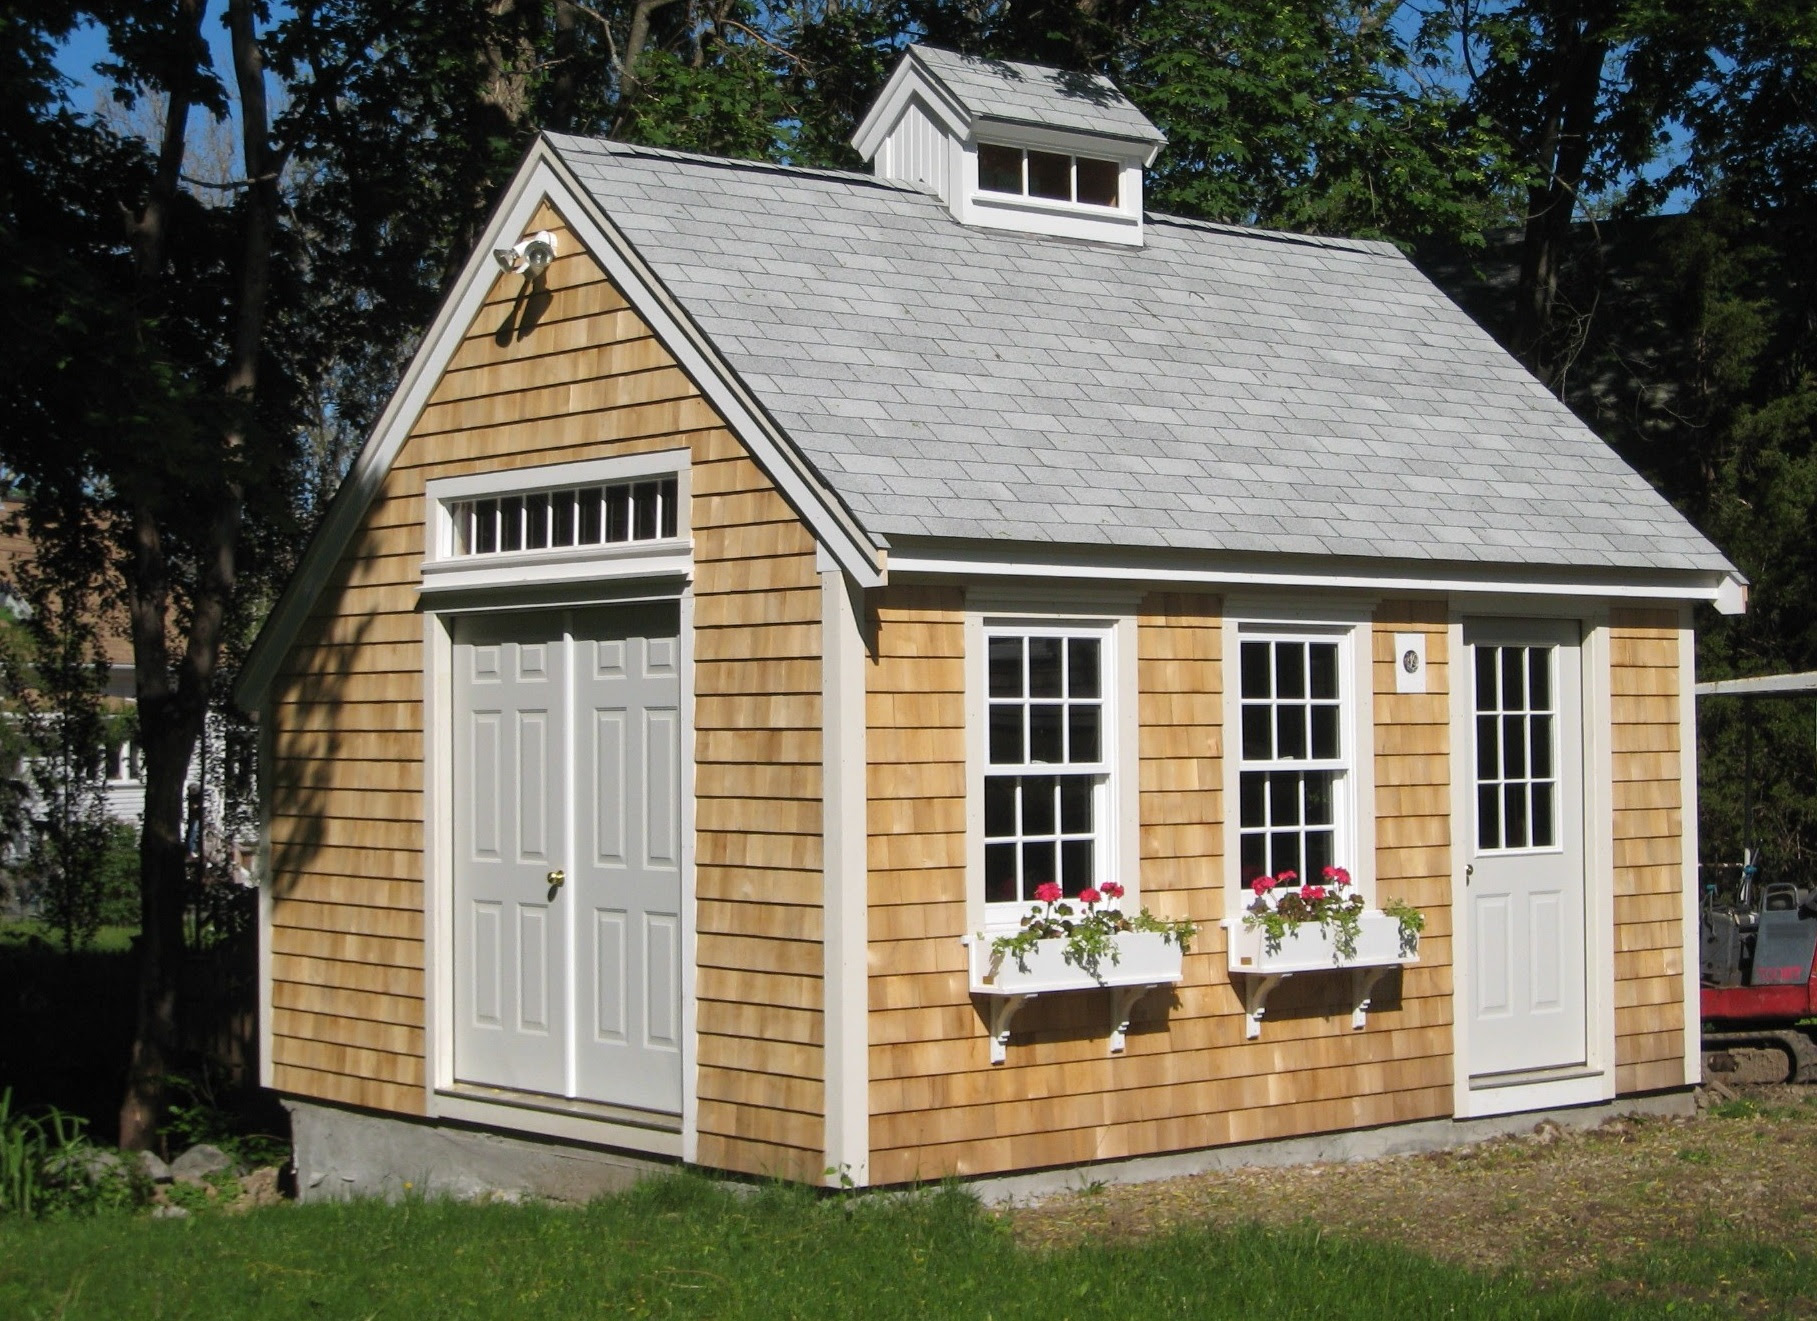 ... Woodworking Kits for My Wooden Backyard Sheds? | Cool Shed Design